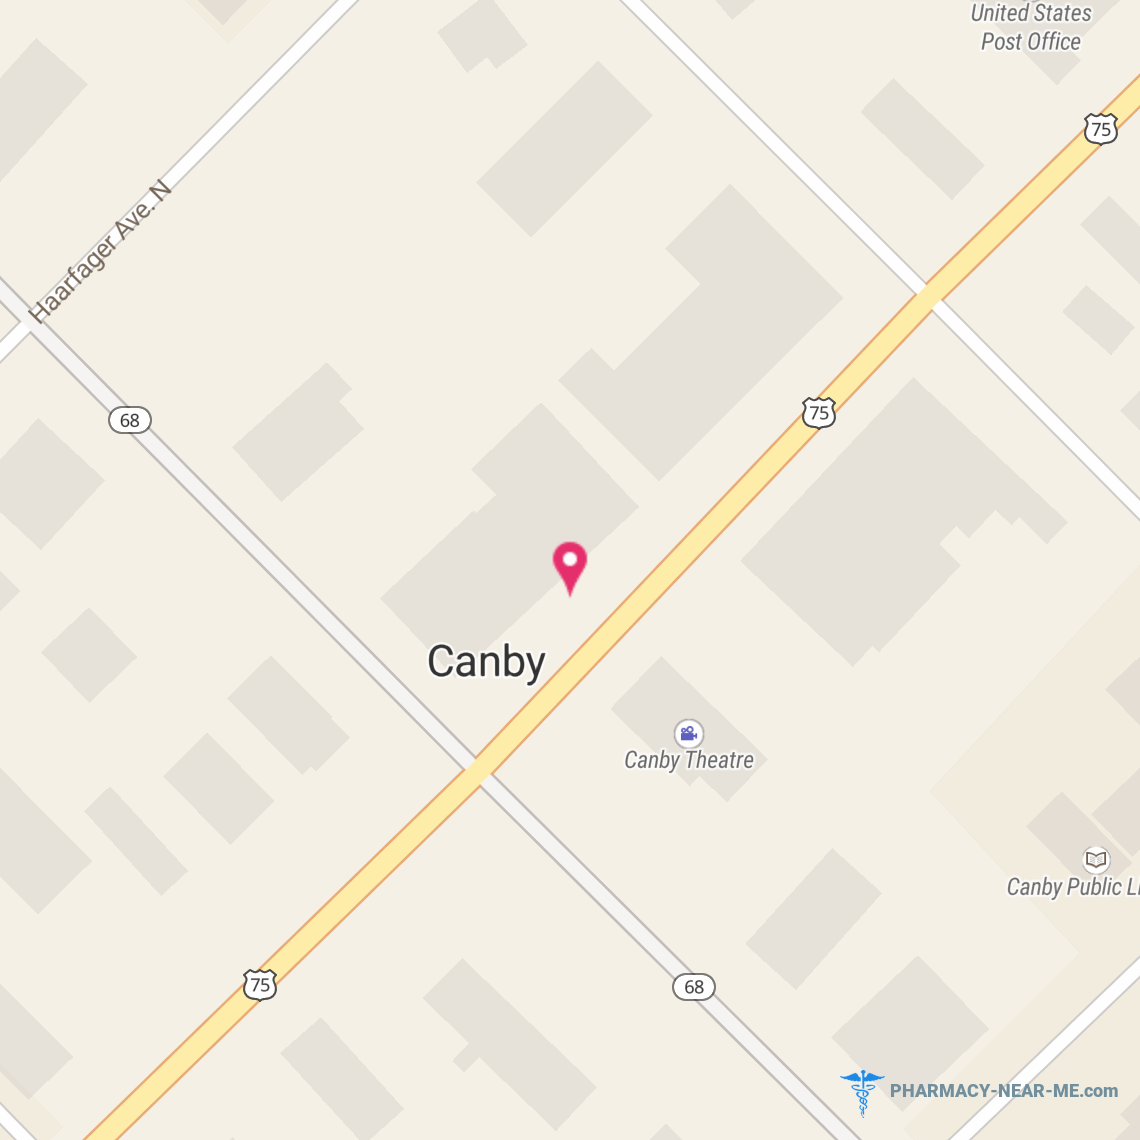 CANBY DRUG - Pharmacy Hours, Phone, Reviews & Information: 130 Saint Olaf Avenue North, Canby, Minnesota 56220, United States